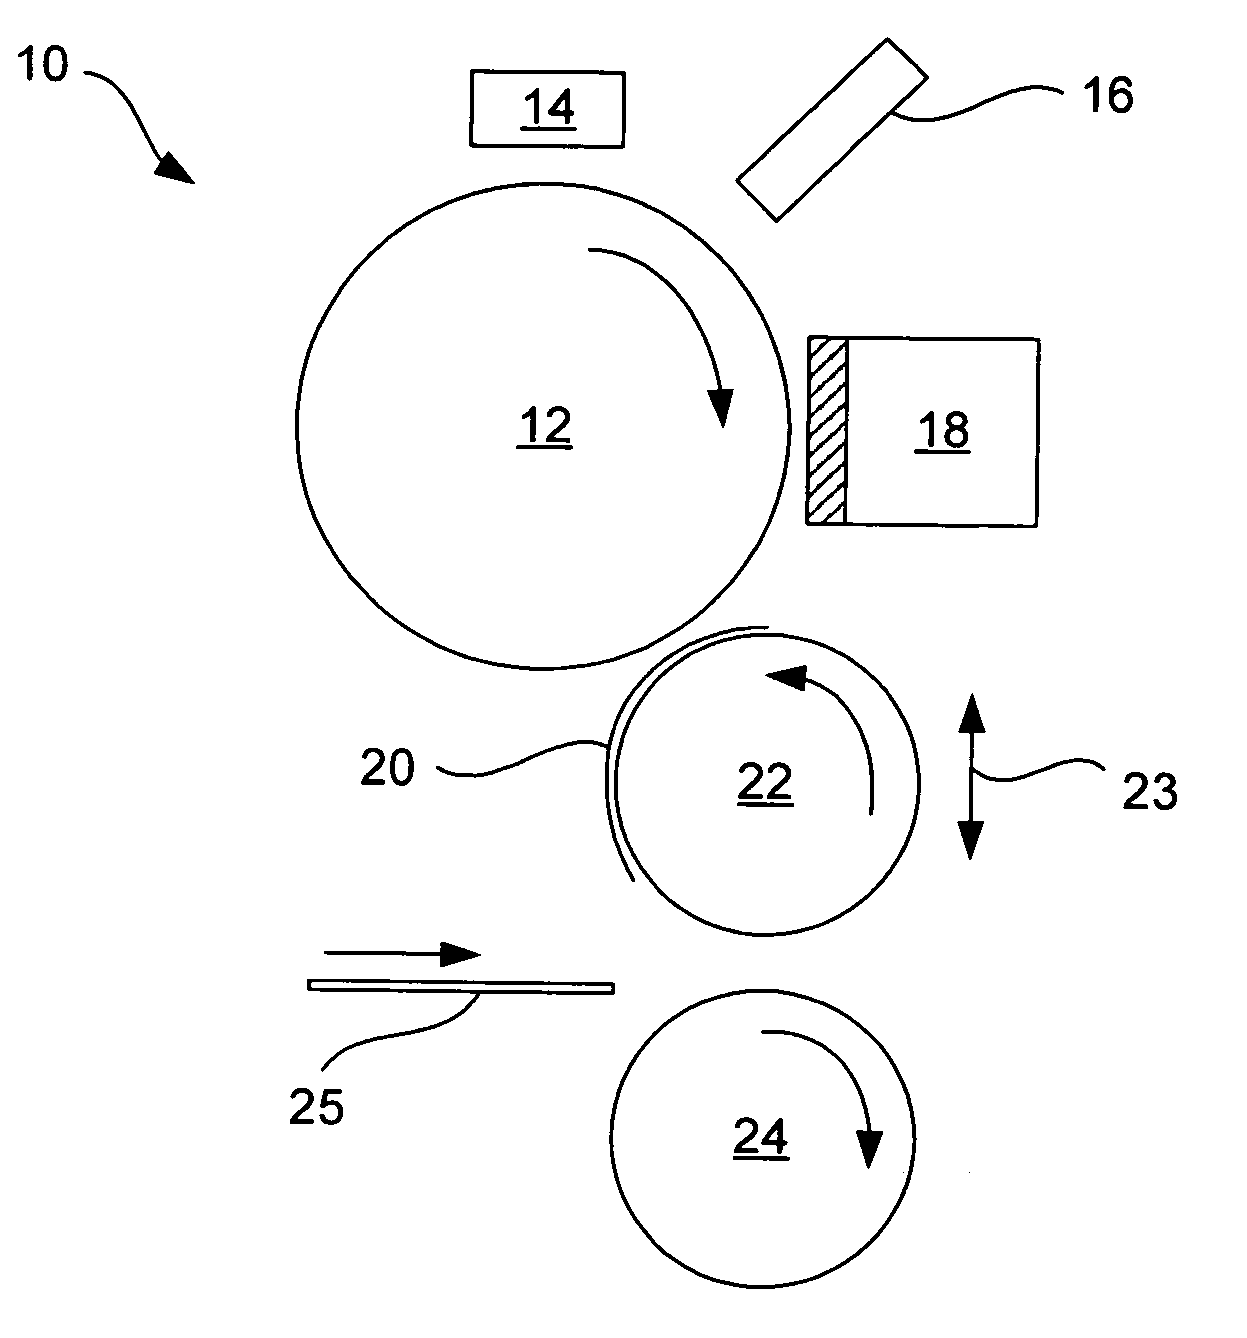 Electrophotographic printing of electronic devices